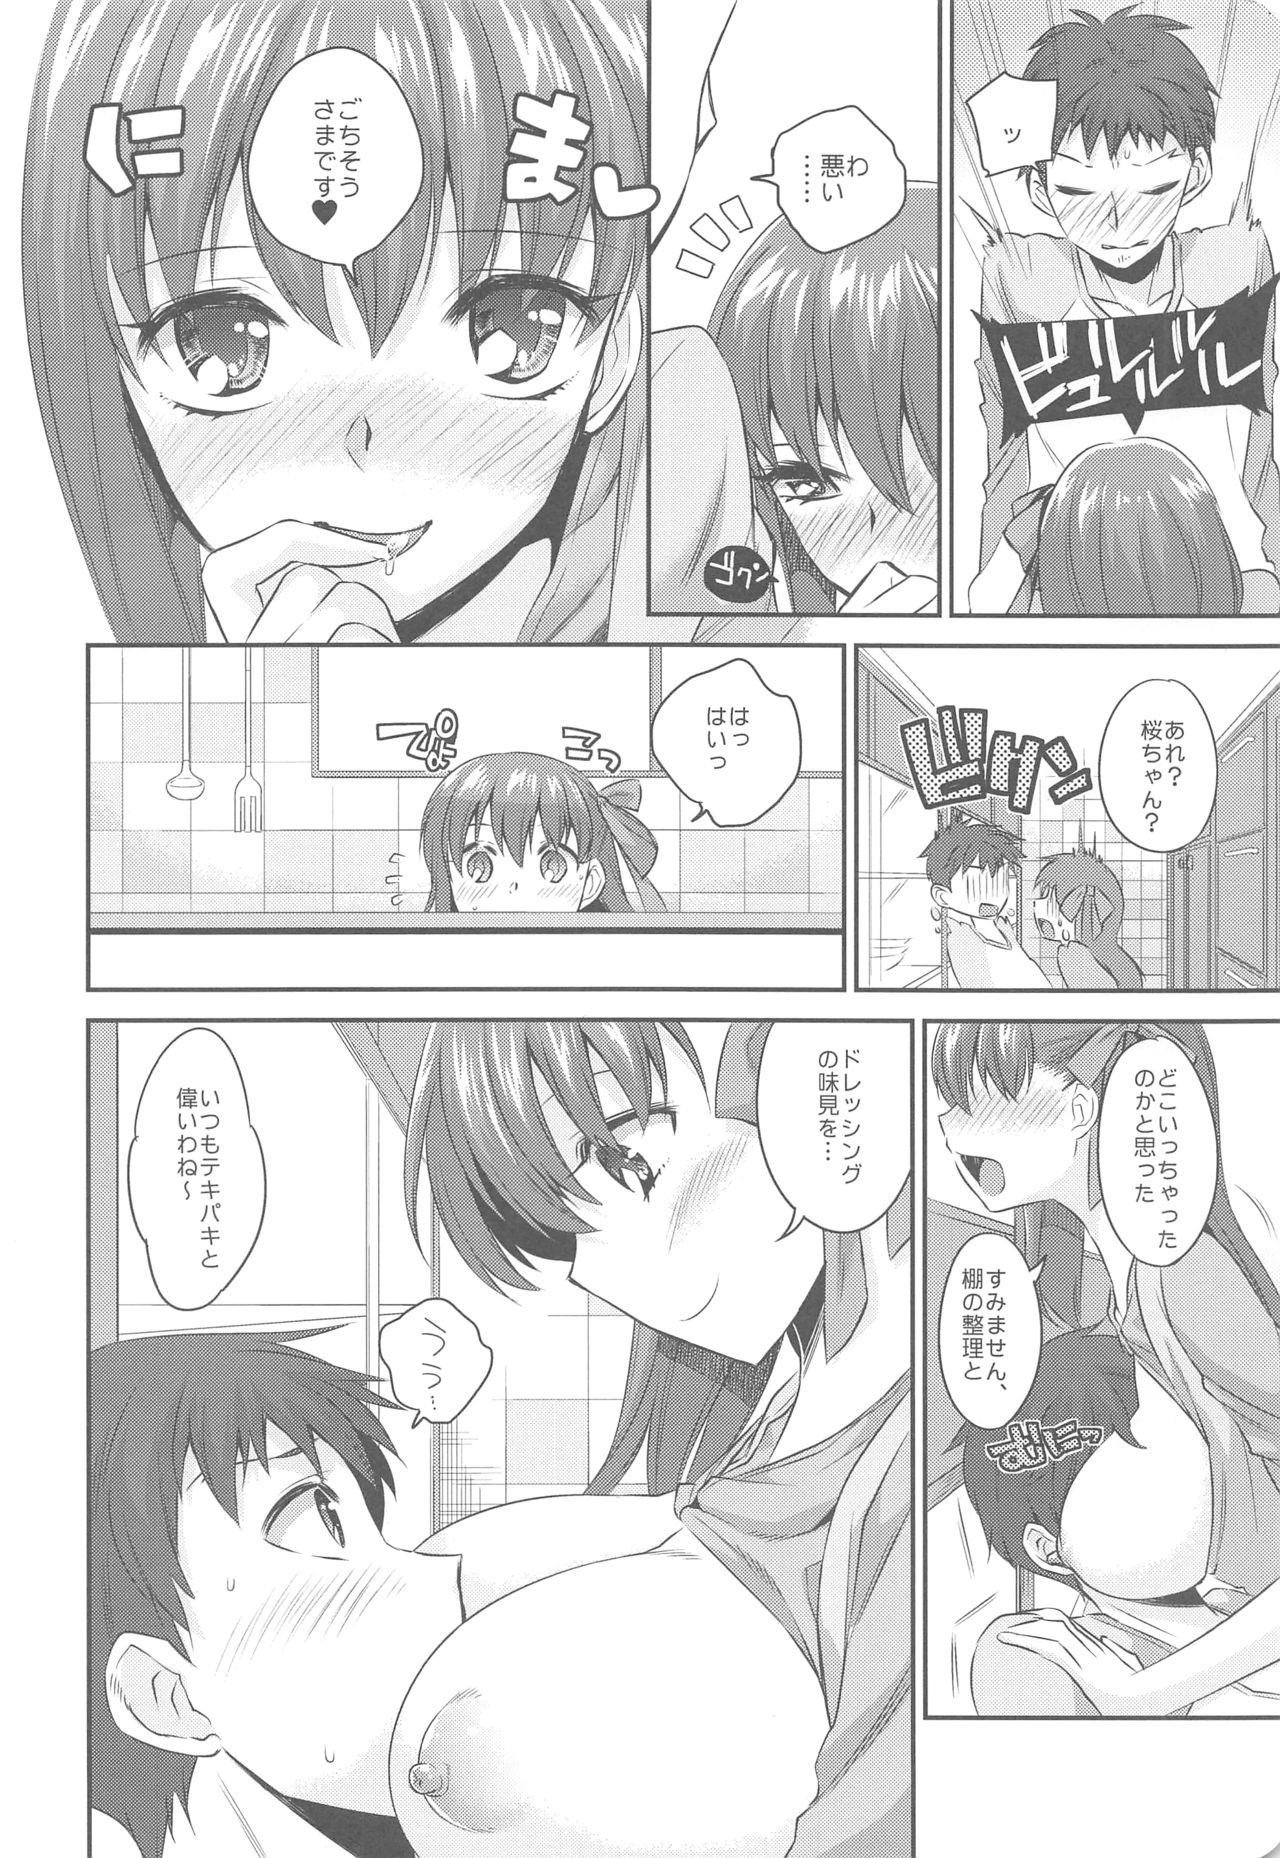 Francais Kitchen H - Fate stay night Lesbians - Page 8